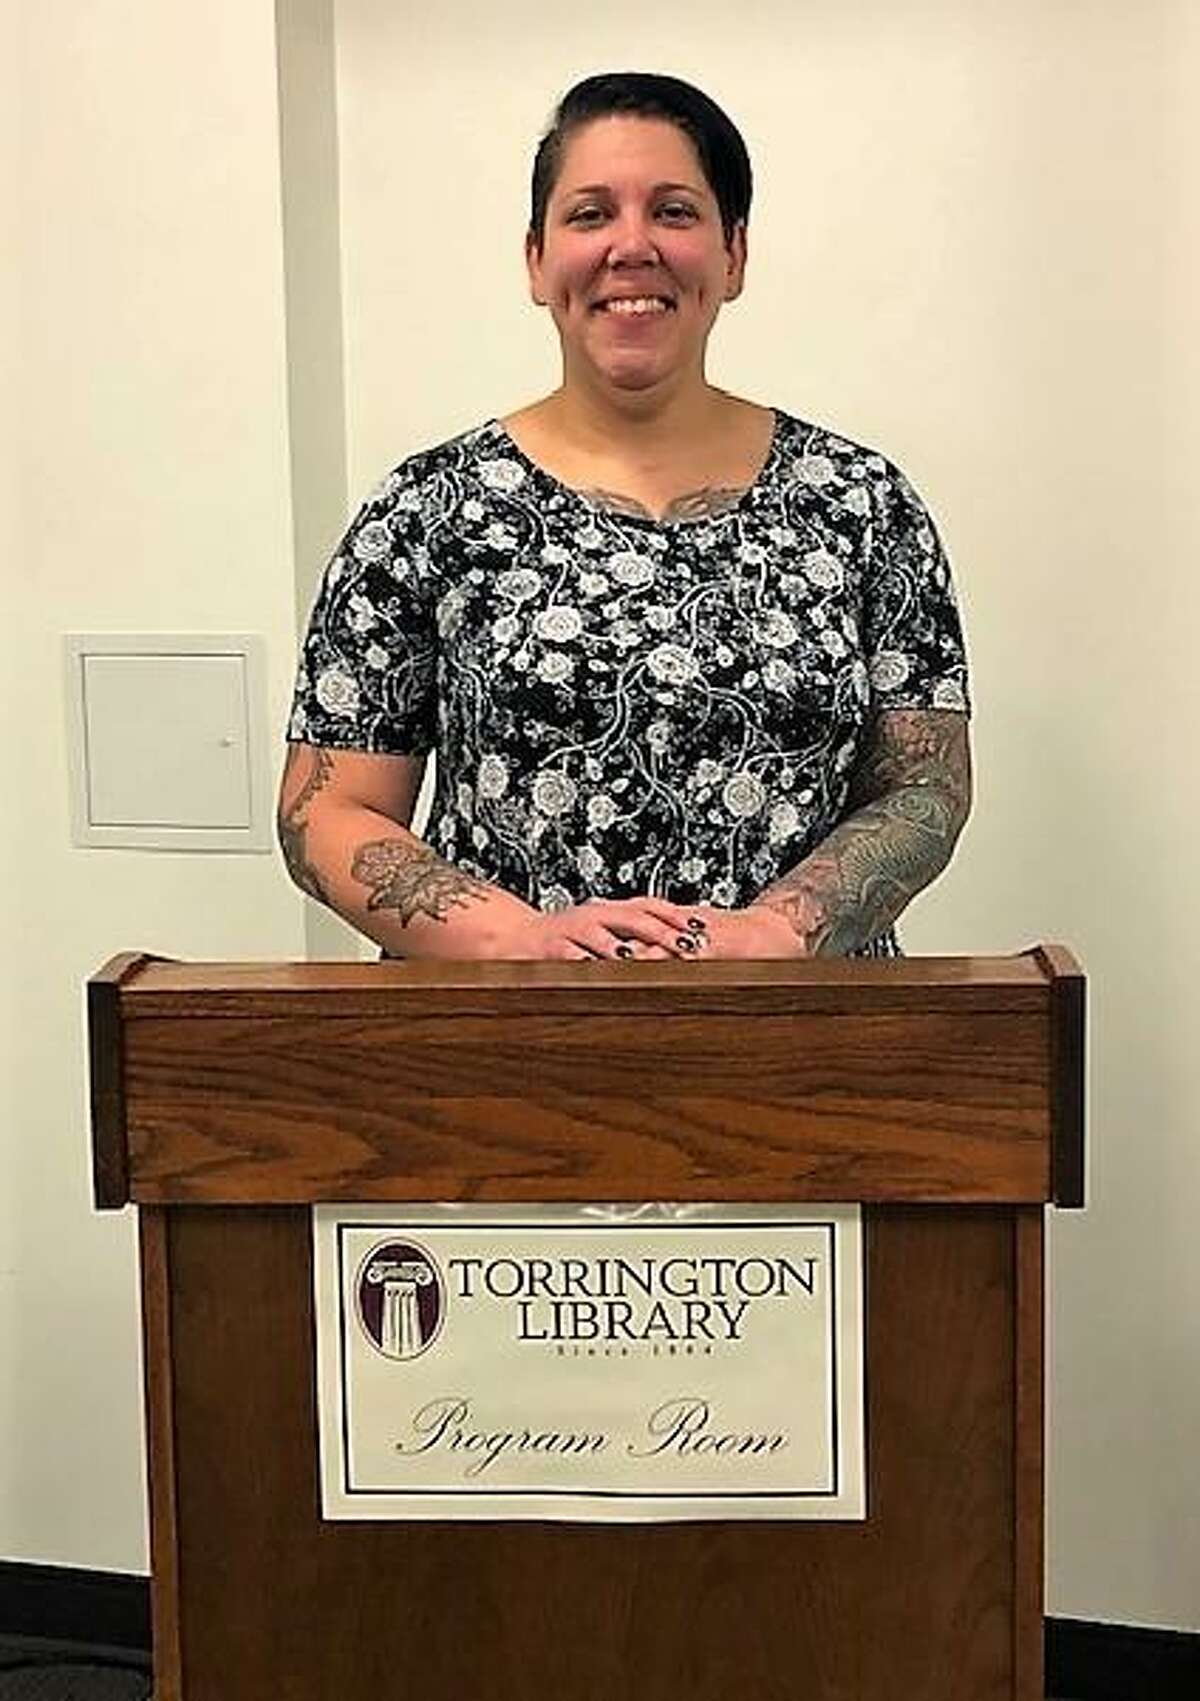 Kat Moskowitz speaks during the opioid awareness program at the Torrington Library. The program was hosted by Community Health & Wellness Center in Torrington.